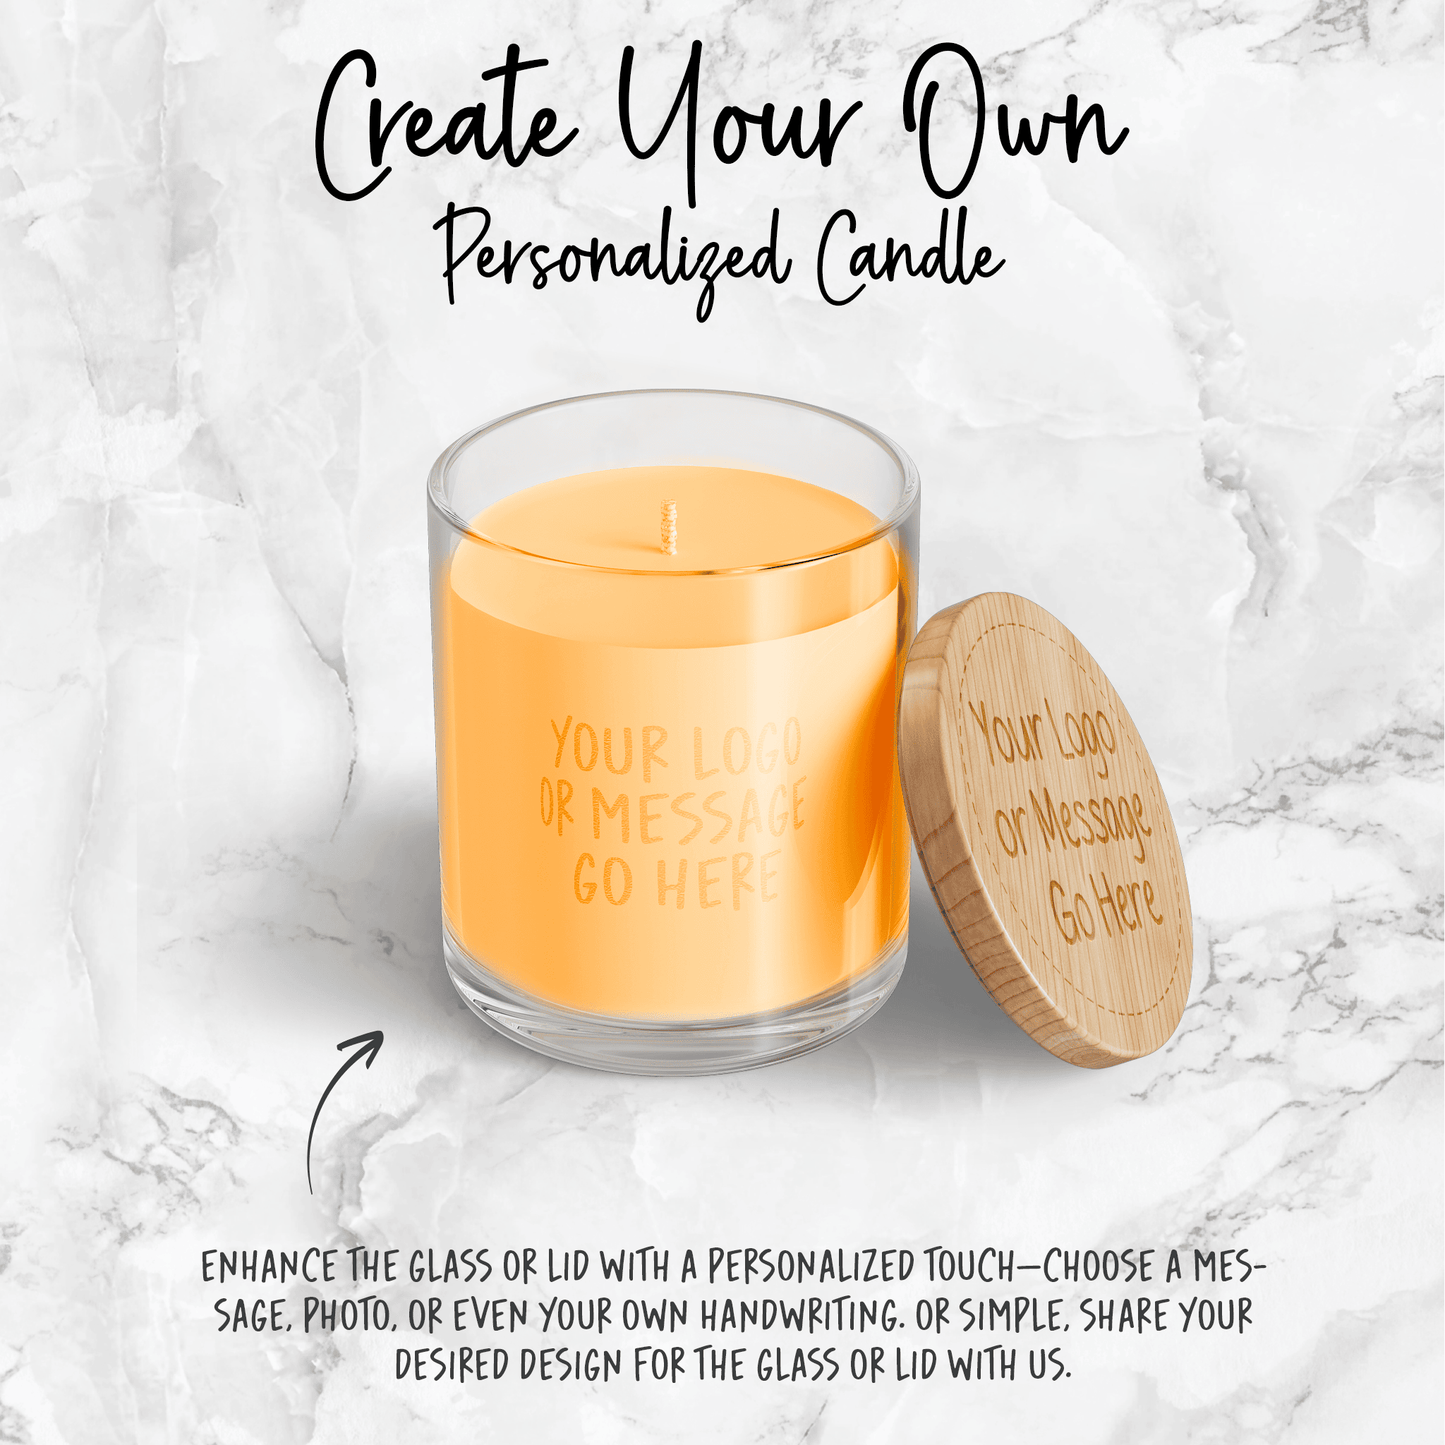 Personalized Engraved Candle | Unique Gift for Special Occasions | Customizable for Weddings, Anniversaries, Birthdays & More!